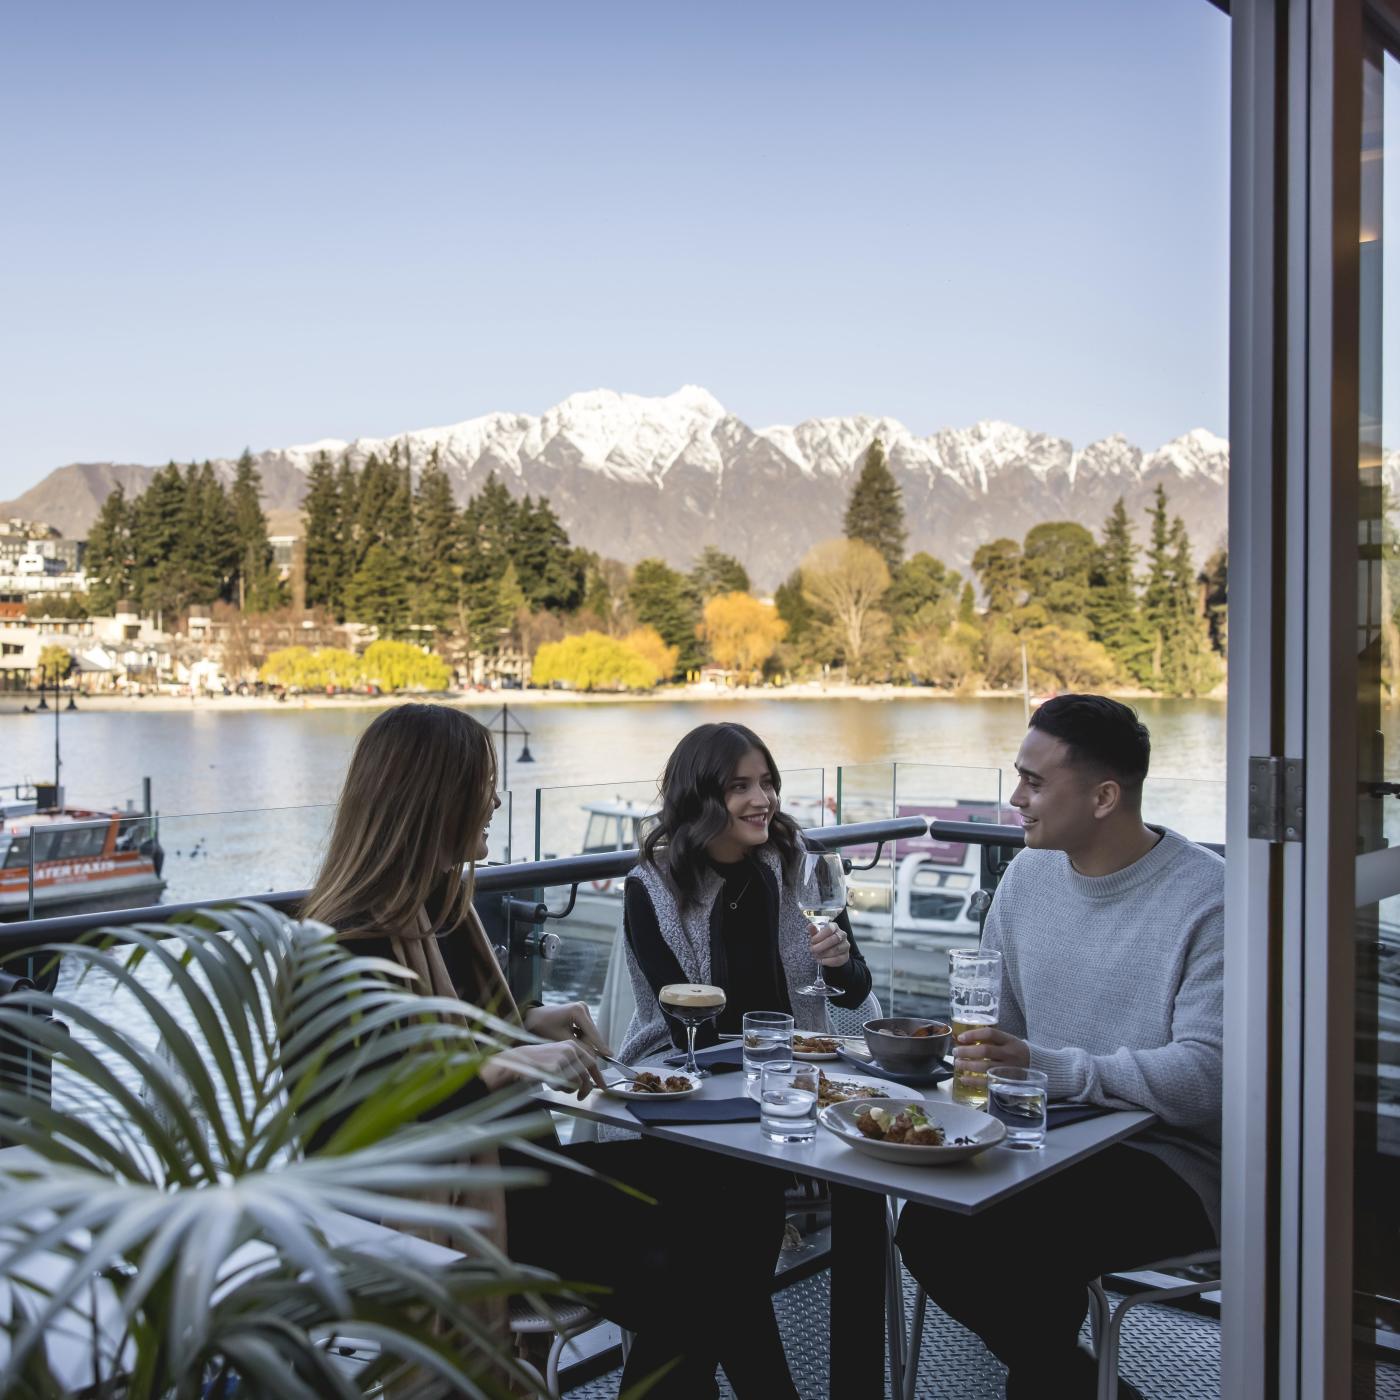 Three people Dining at Boardwalk with snowy mountains in the background